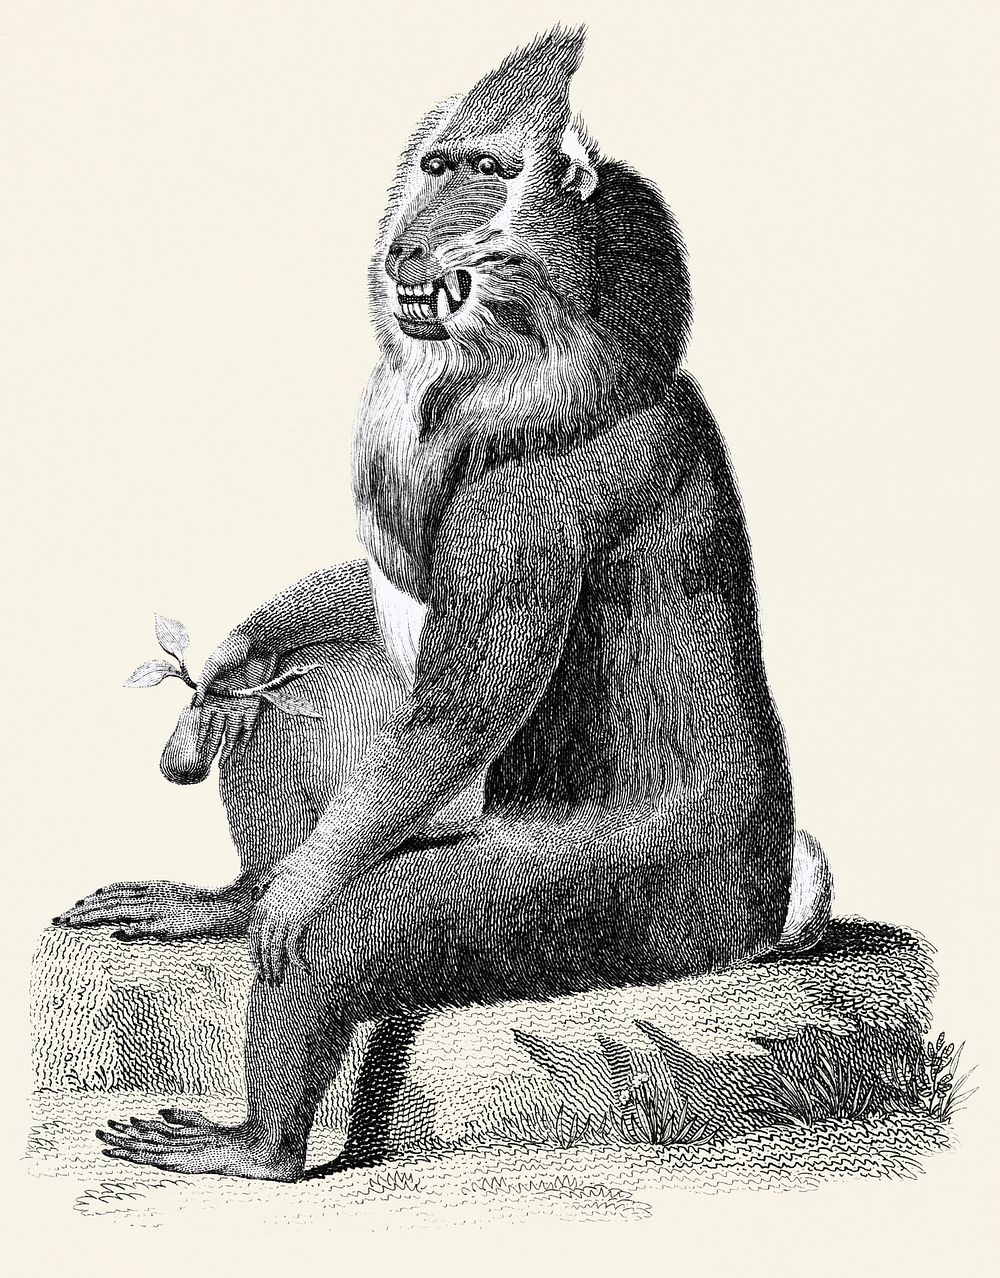 Variegated baboon from Zoological lectures delivered at the Royal institution in the years 1806-7 illustrated by George Shaw…